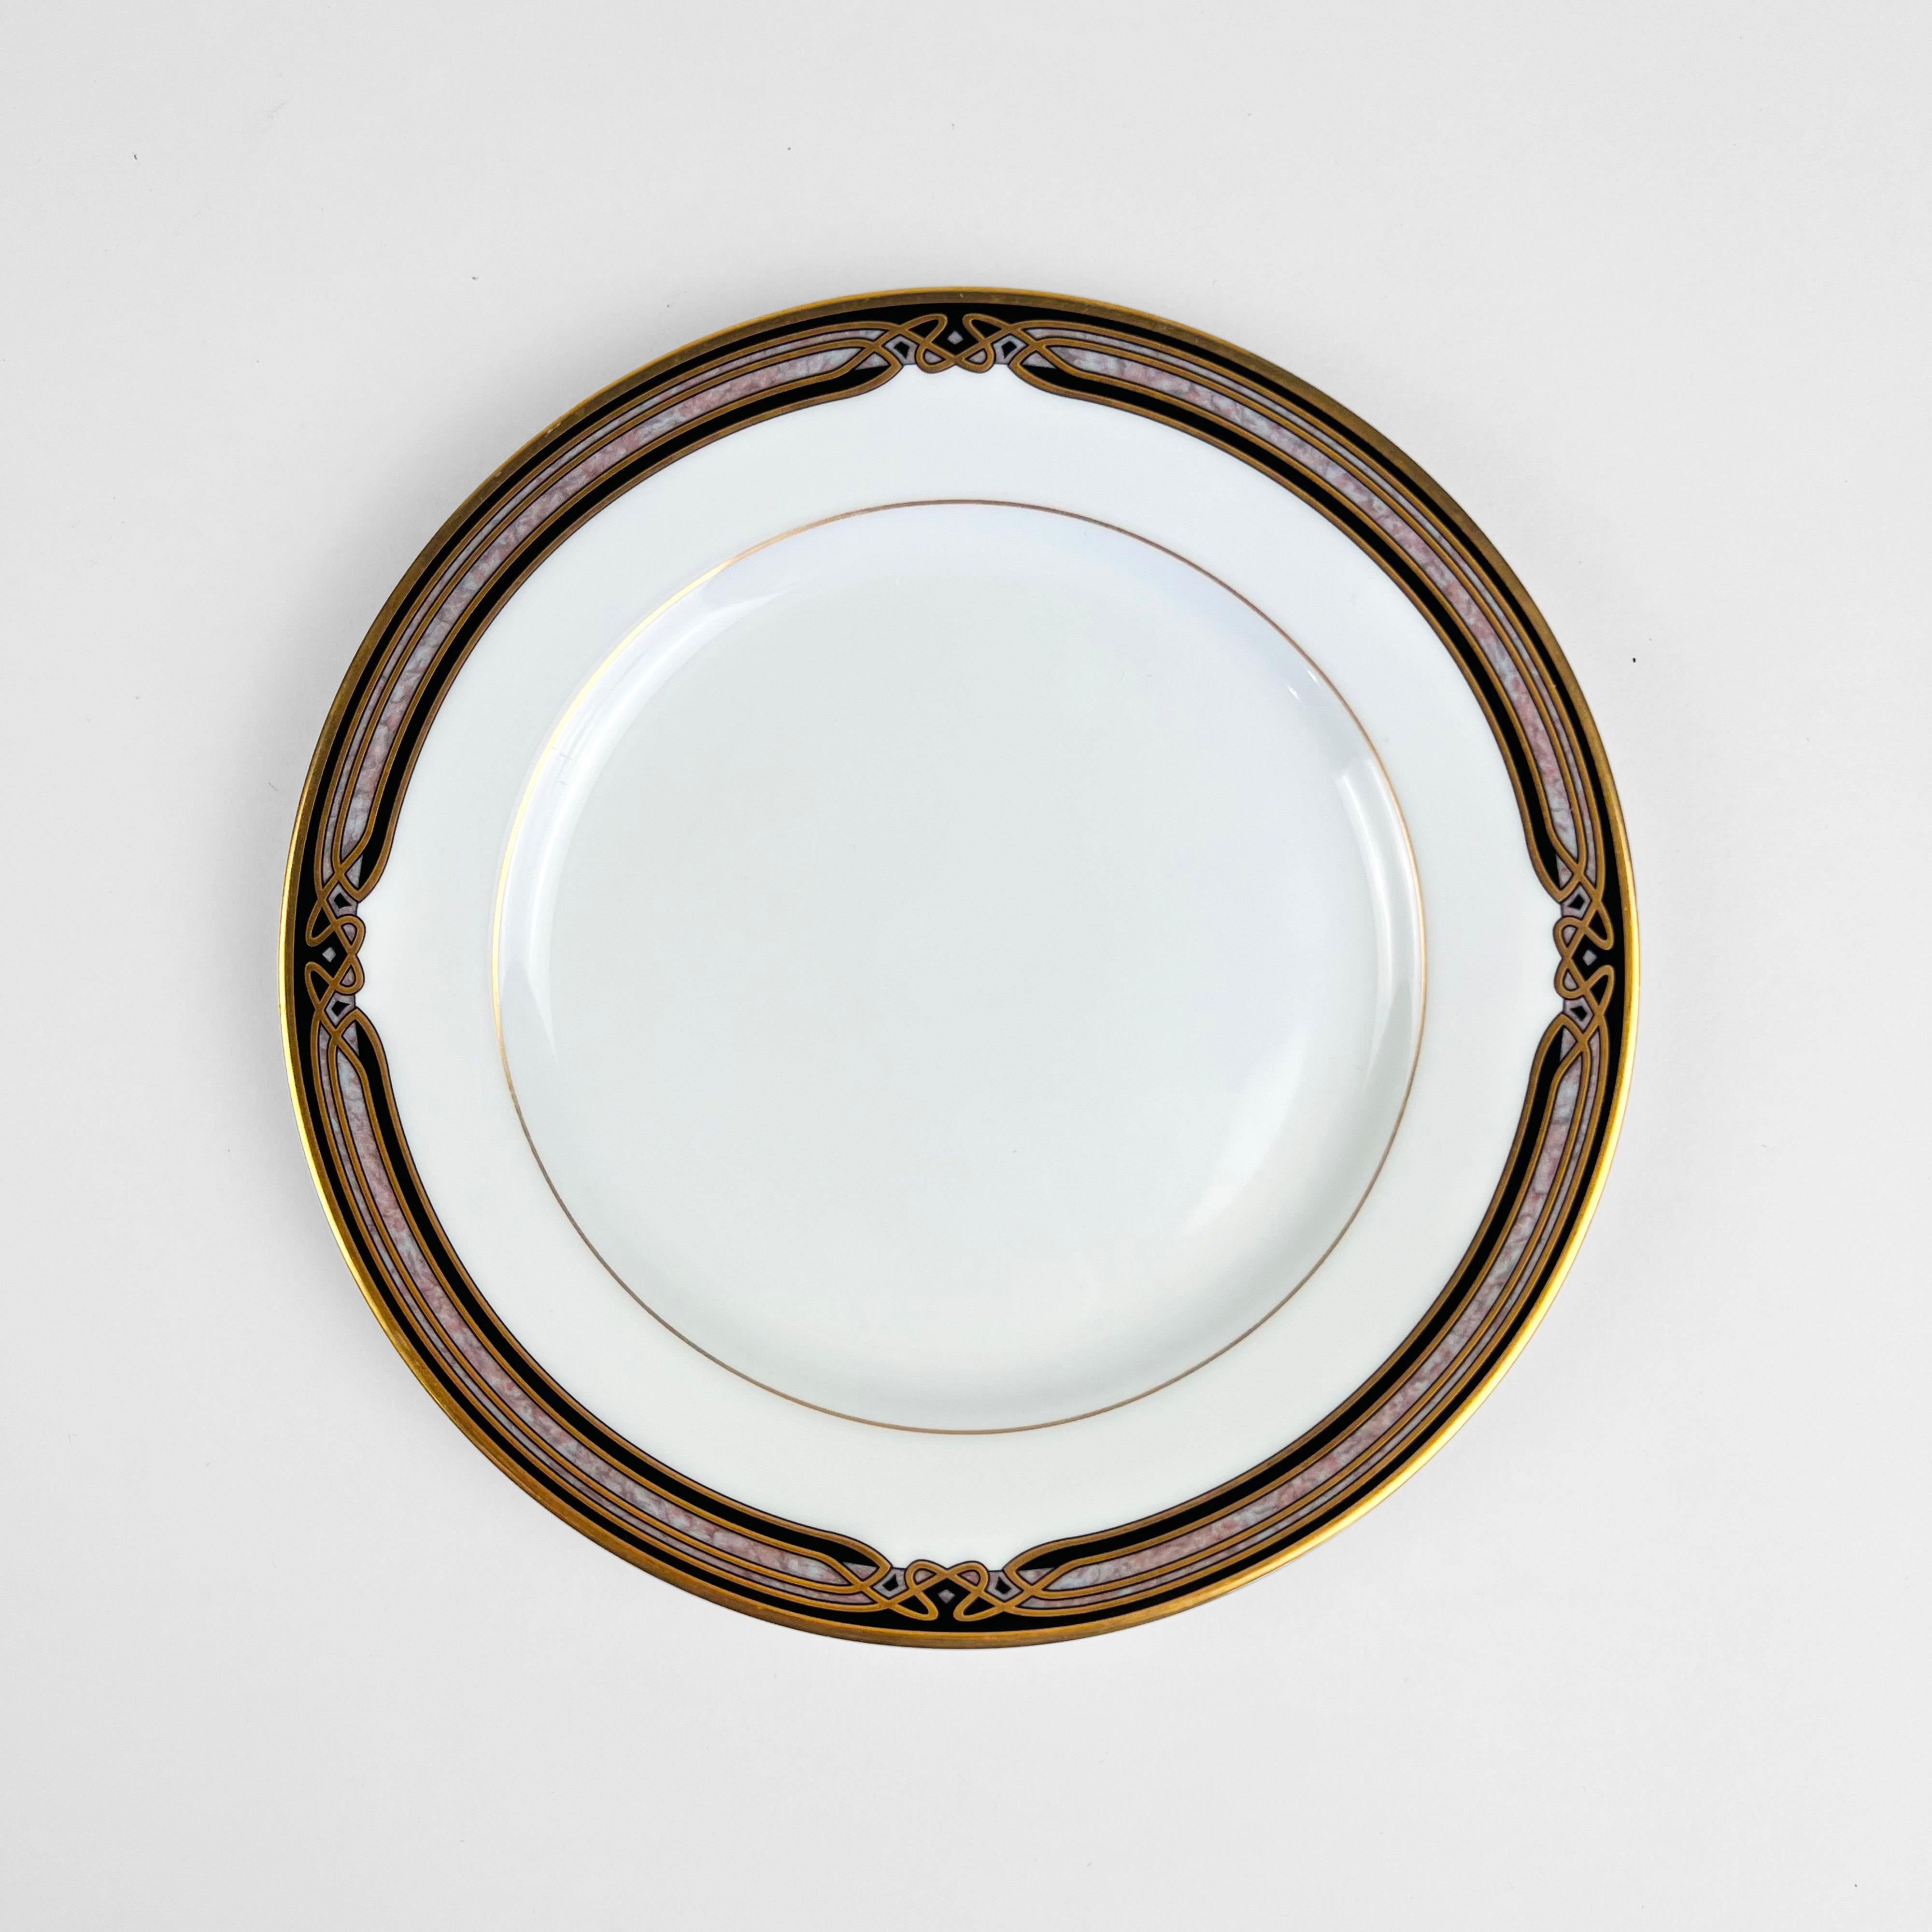 Set of thirty six porcelain dinner plates in three sizes.
Made by Wedgwood in Japan, in 1990s.

DIMENSIONS:
LARGE PLATE
Diam: 11